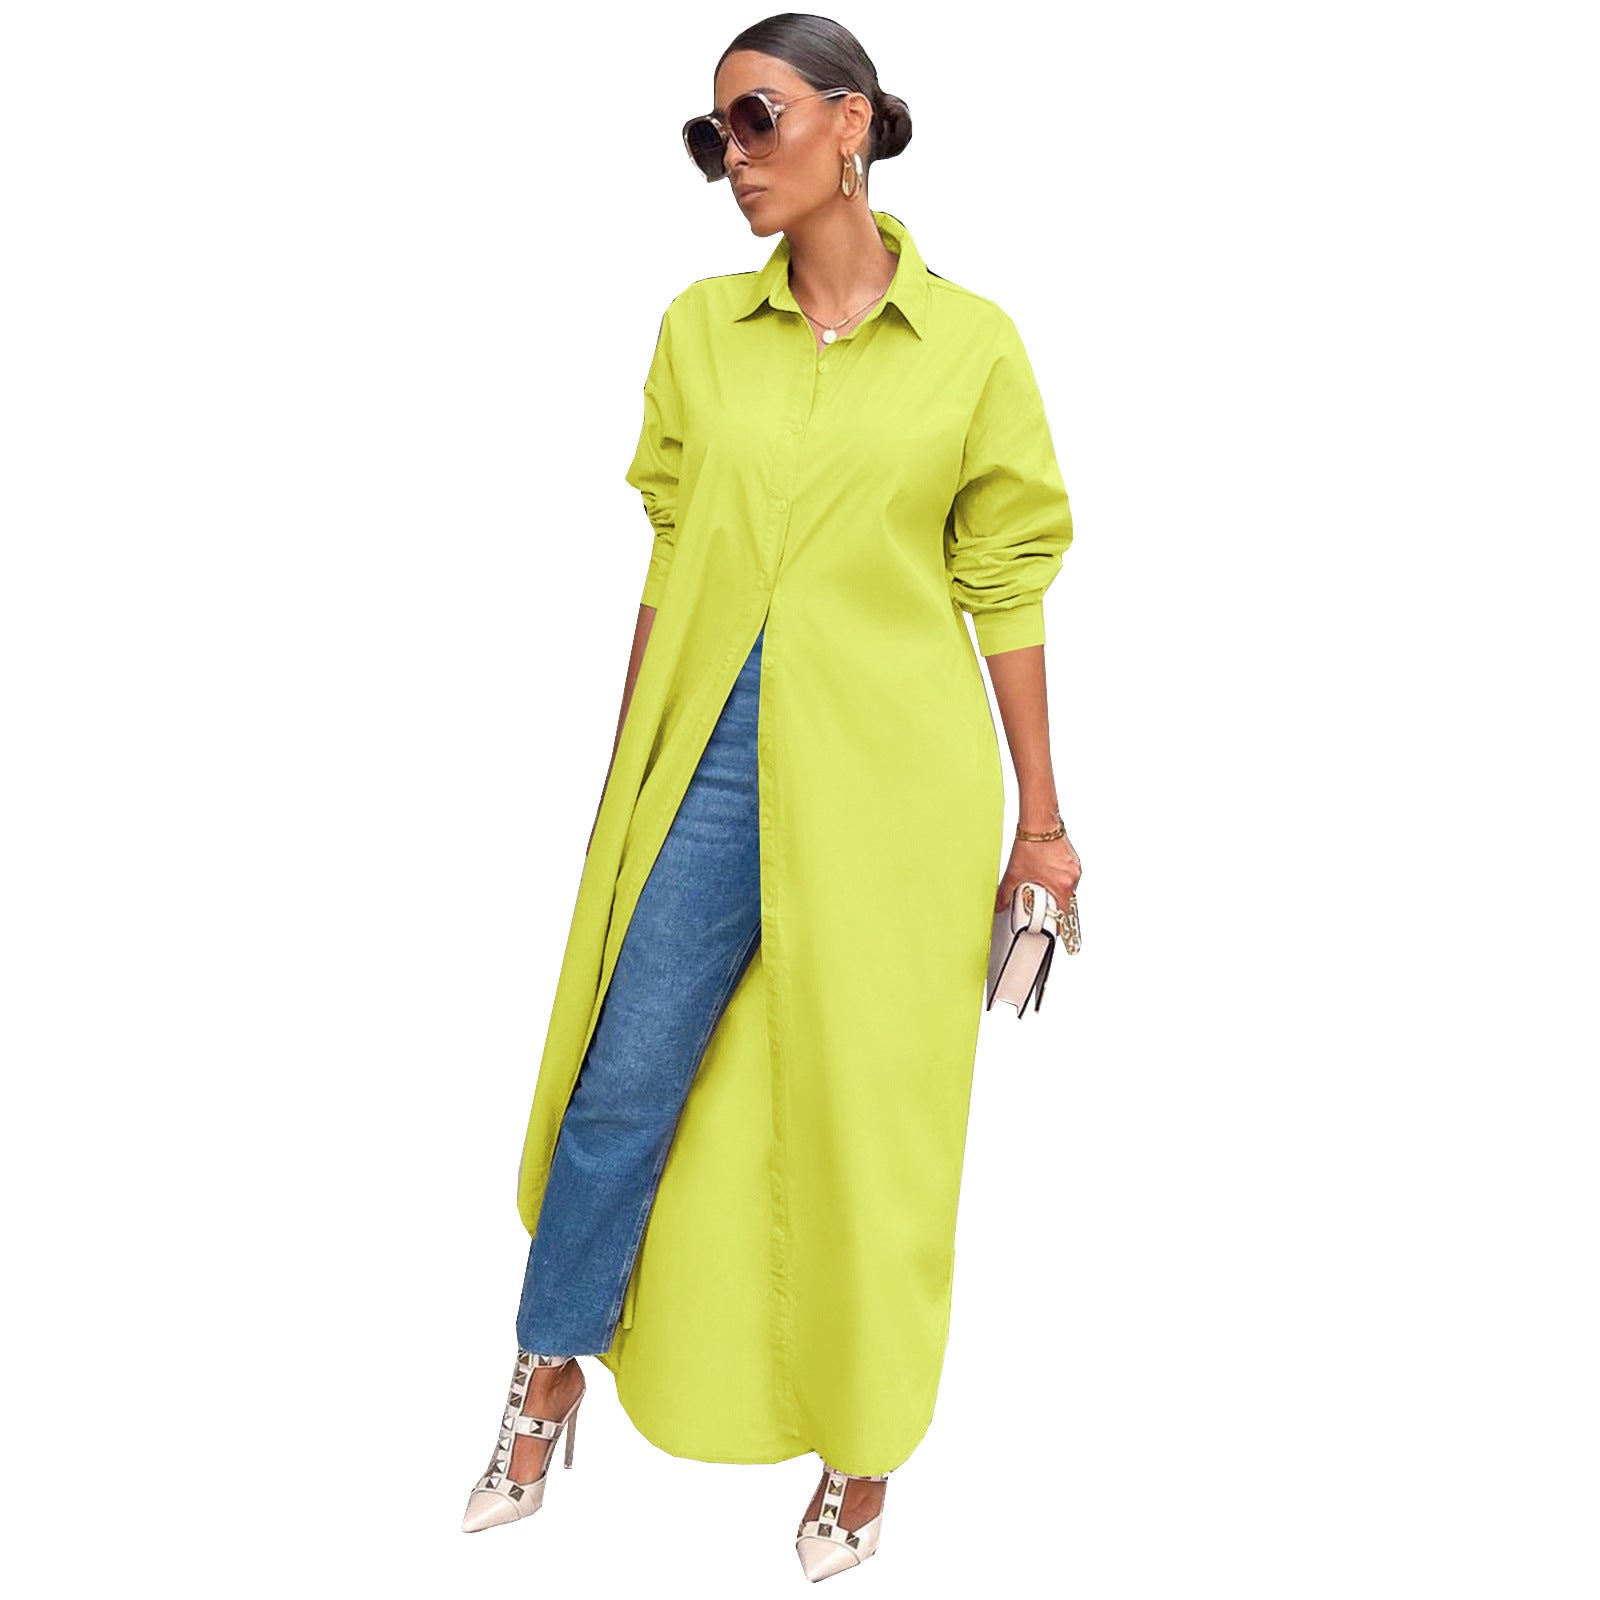 Women's Fashion Casual Solid Color Long Shirt Blouses